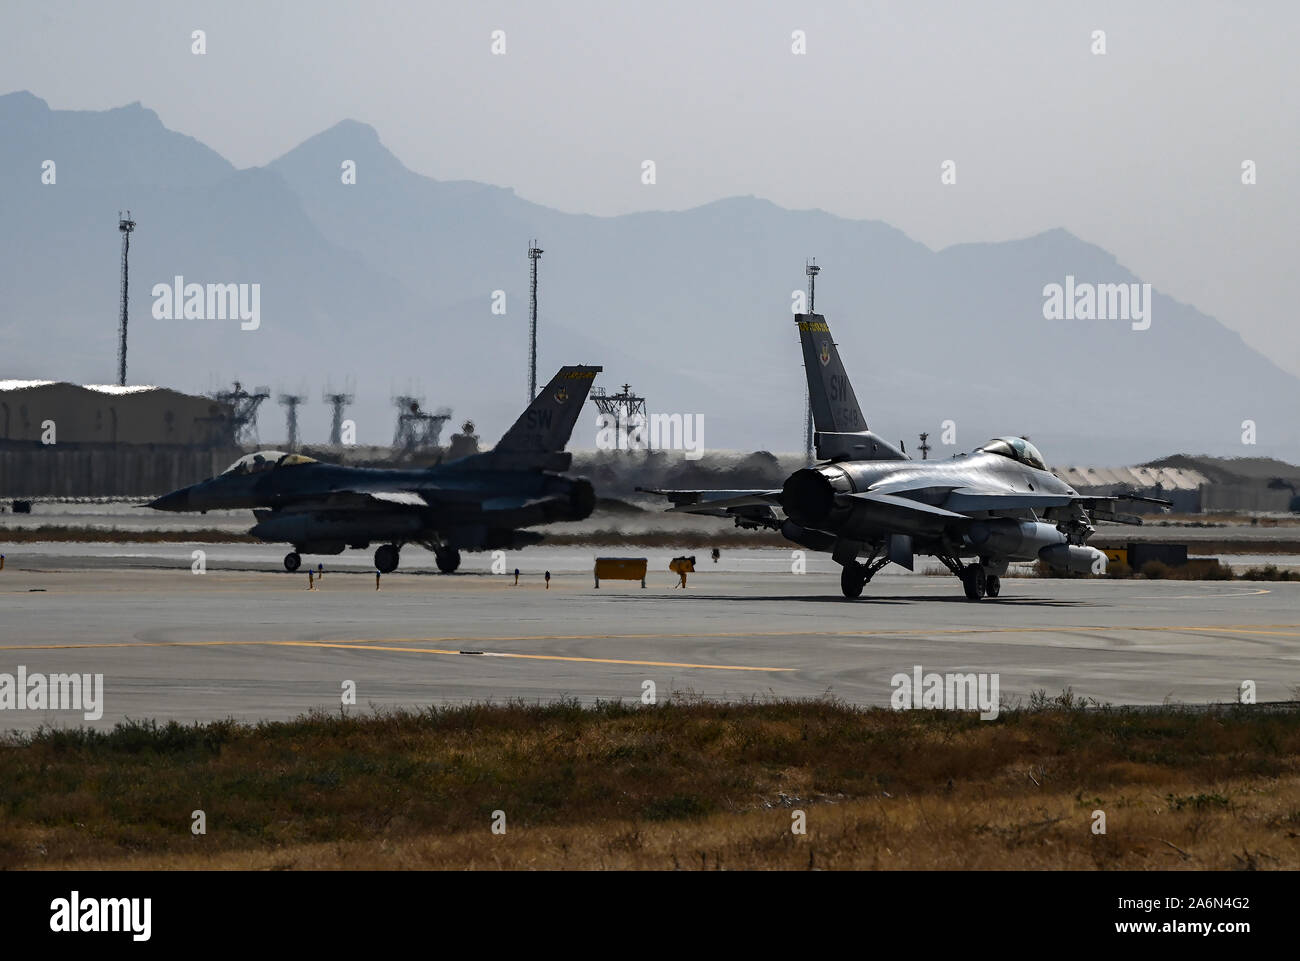 U.S. Air Force F-16 Fighting Falcons from the 79th Fighter Squadron at Shaw Air Force Base, S.C., arrive at Bagram Airfield, Afghanistan, Oct. 26, 2019. While assigned to the 455th Air Expeditionary Wing at Bagram, the F-16s will help provide decisive airpower through the U.S. Central Command area of responsibility. The airpower the wing provides ensures NATO forces can focus on their mission to train, advise and assist. (U.S. Air Force photo by Staff Sgt. Matthew Lotz) Stock Photo